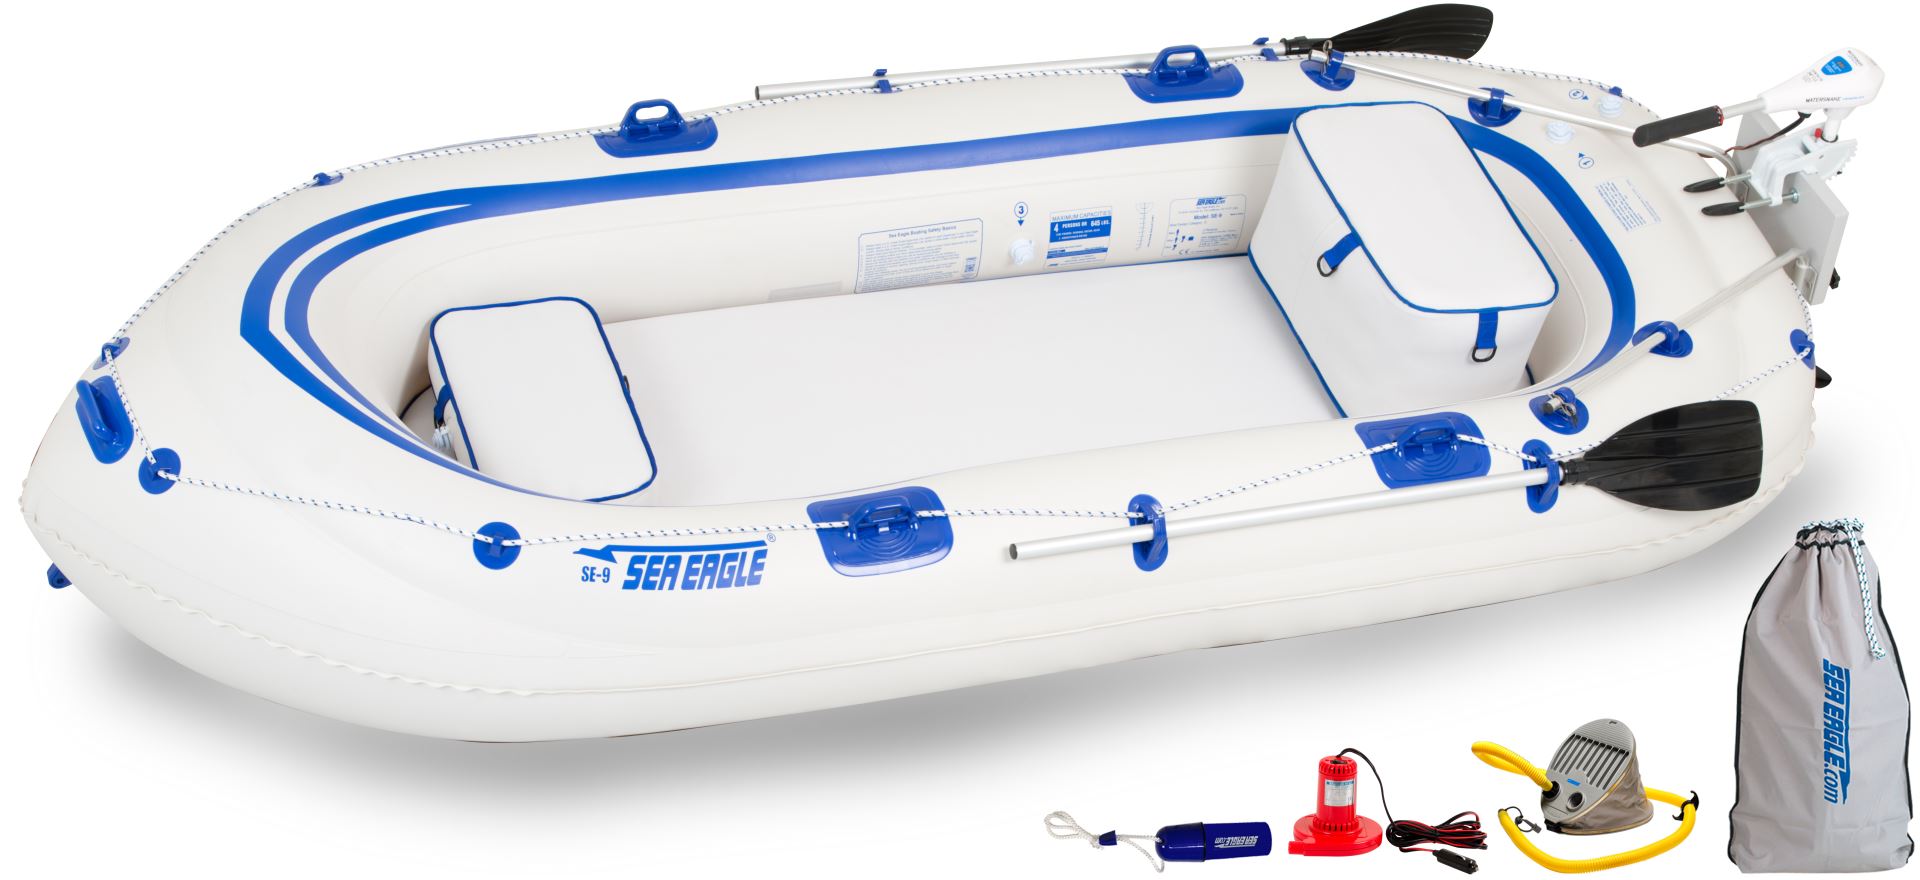 Inflatable Rafts, Inflatable Fishing Raft, Dinghy Boat with Motor Kayak  Dinghies White